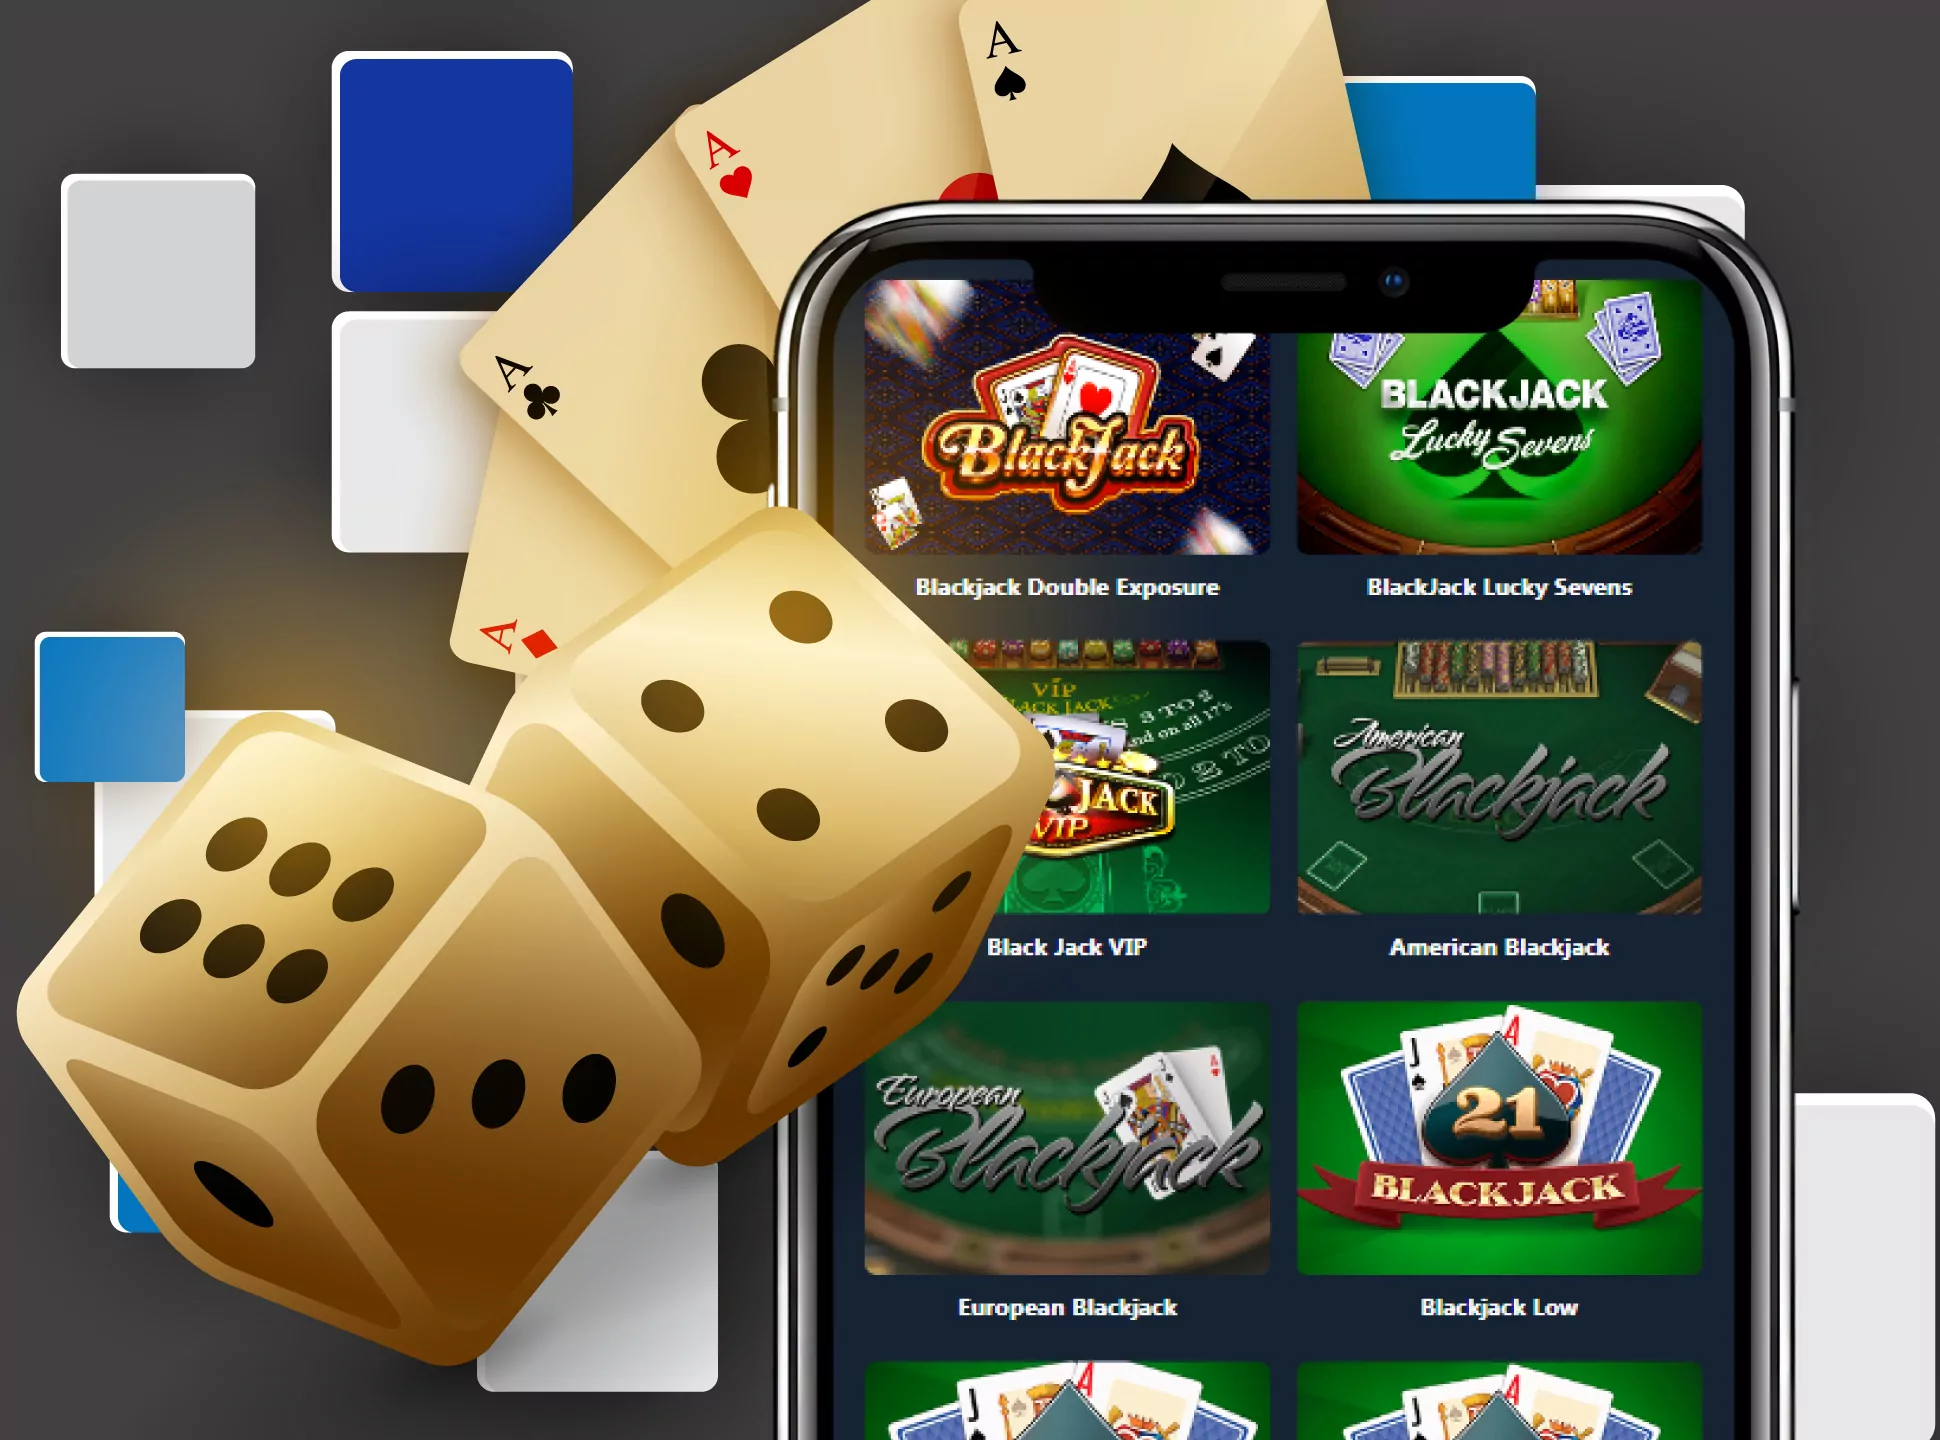 Get 21 points and win the blackjack against the real dealer.